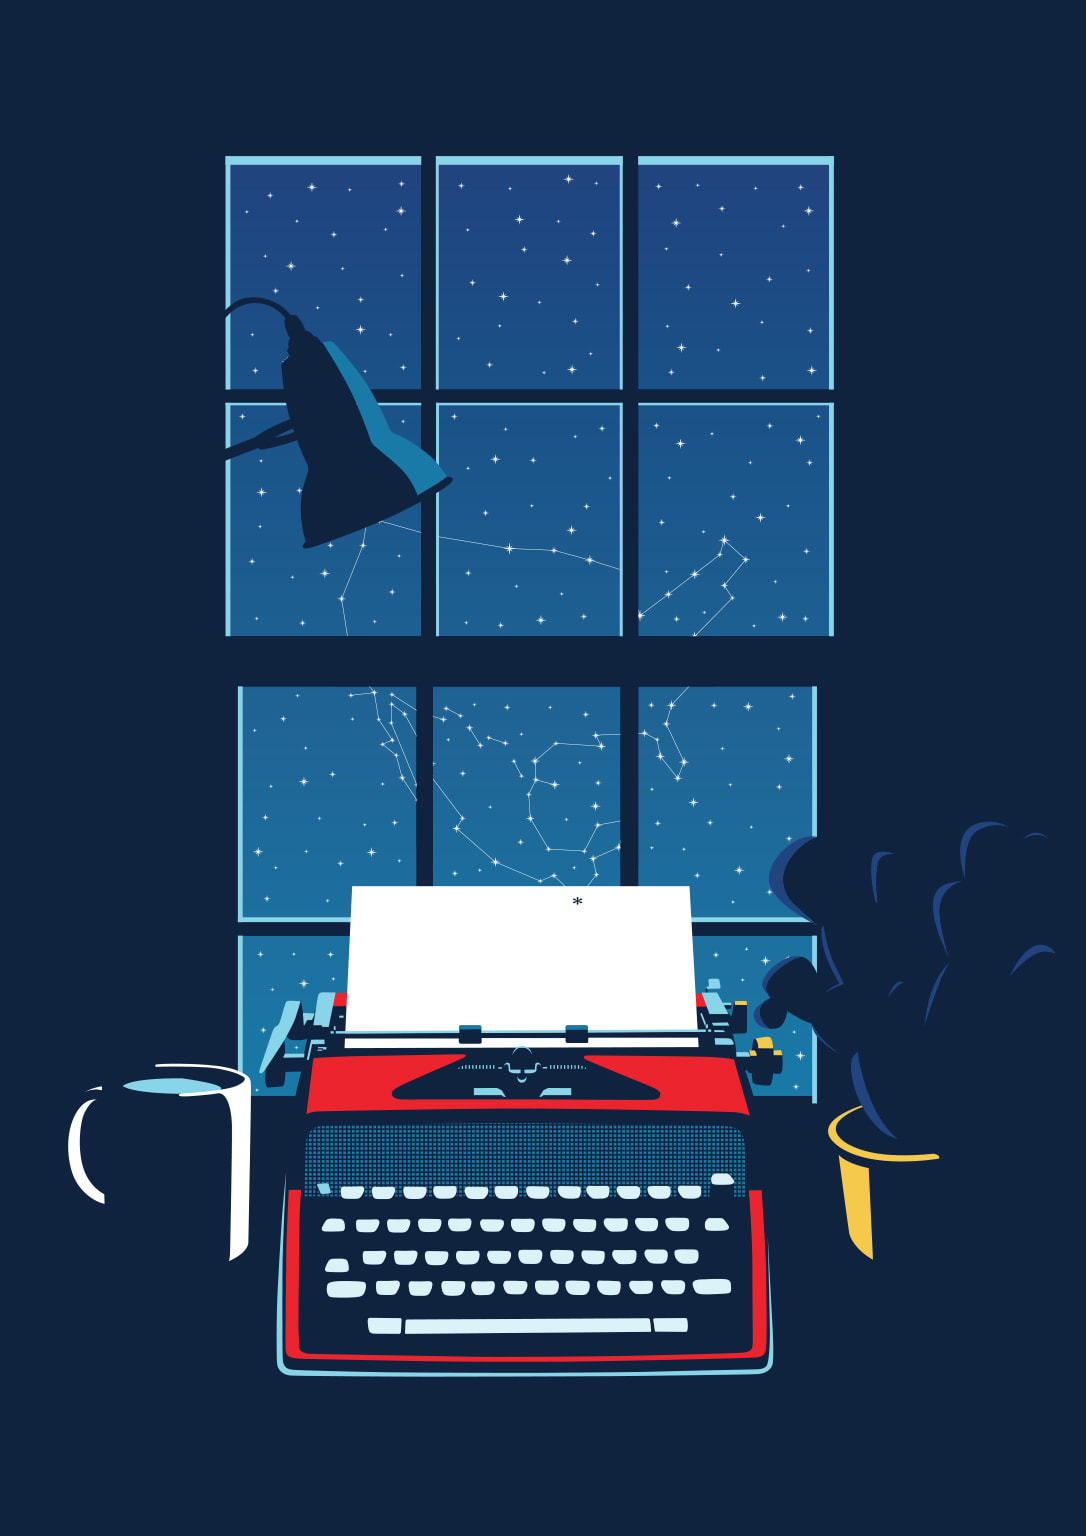 An illustration of a typewriter in front of a window: a conceptual illustration by Federico Gastaldi.